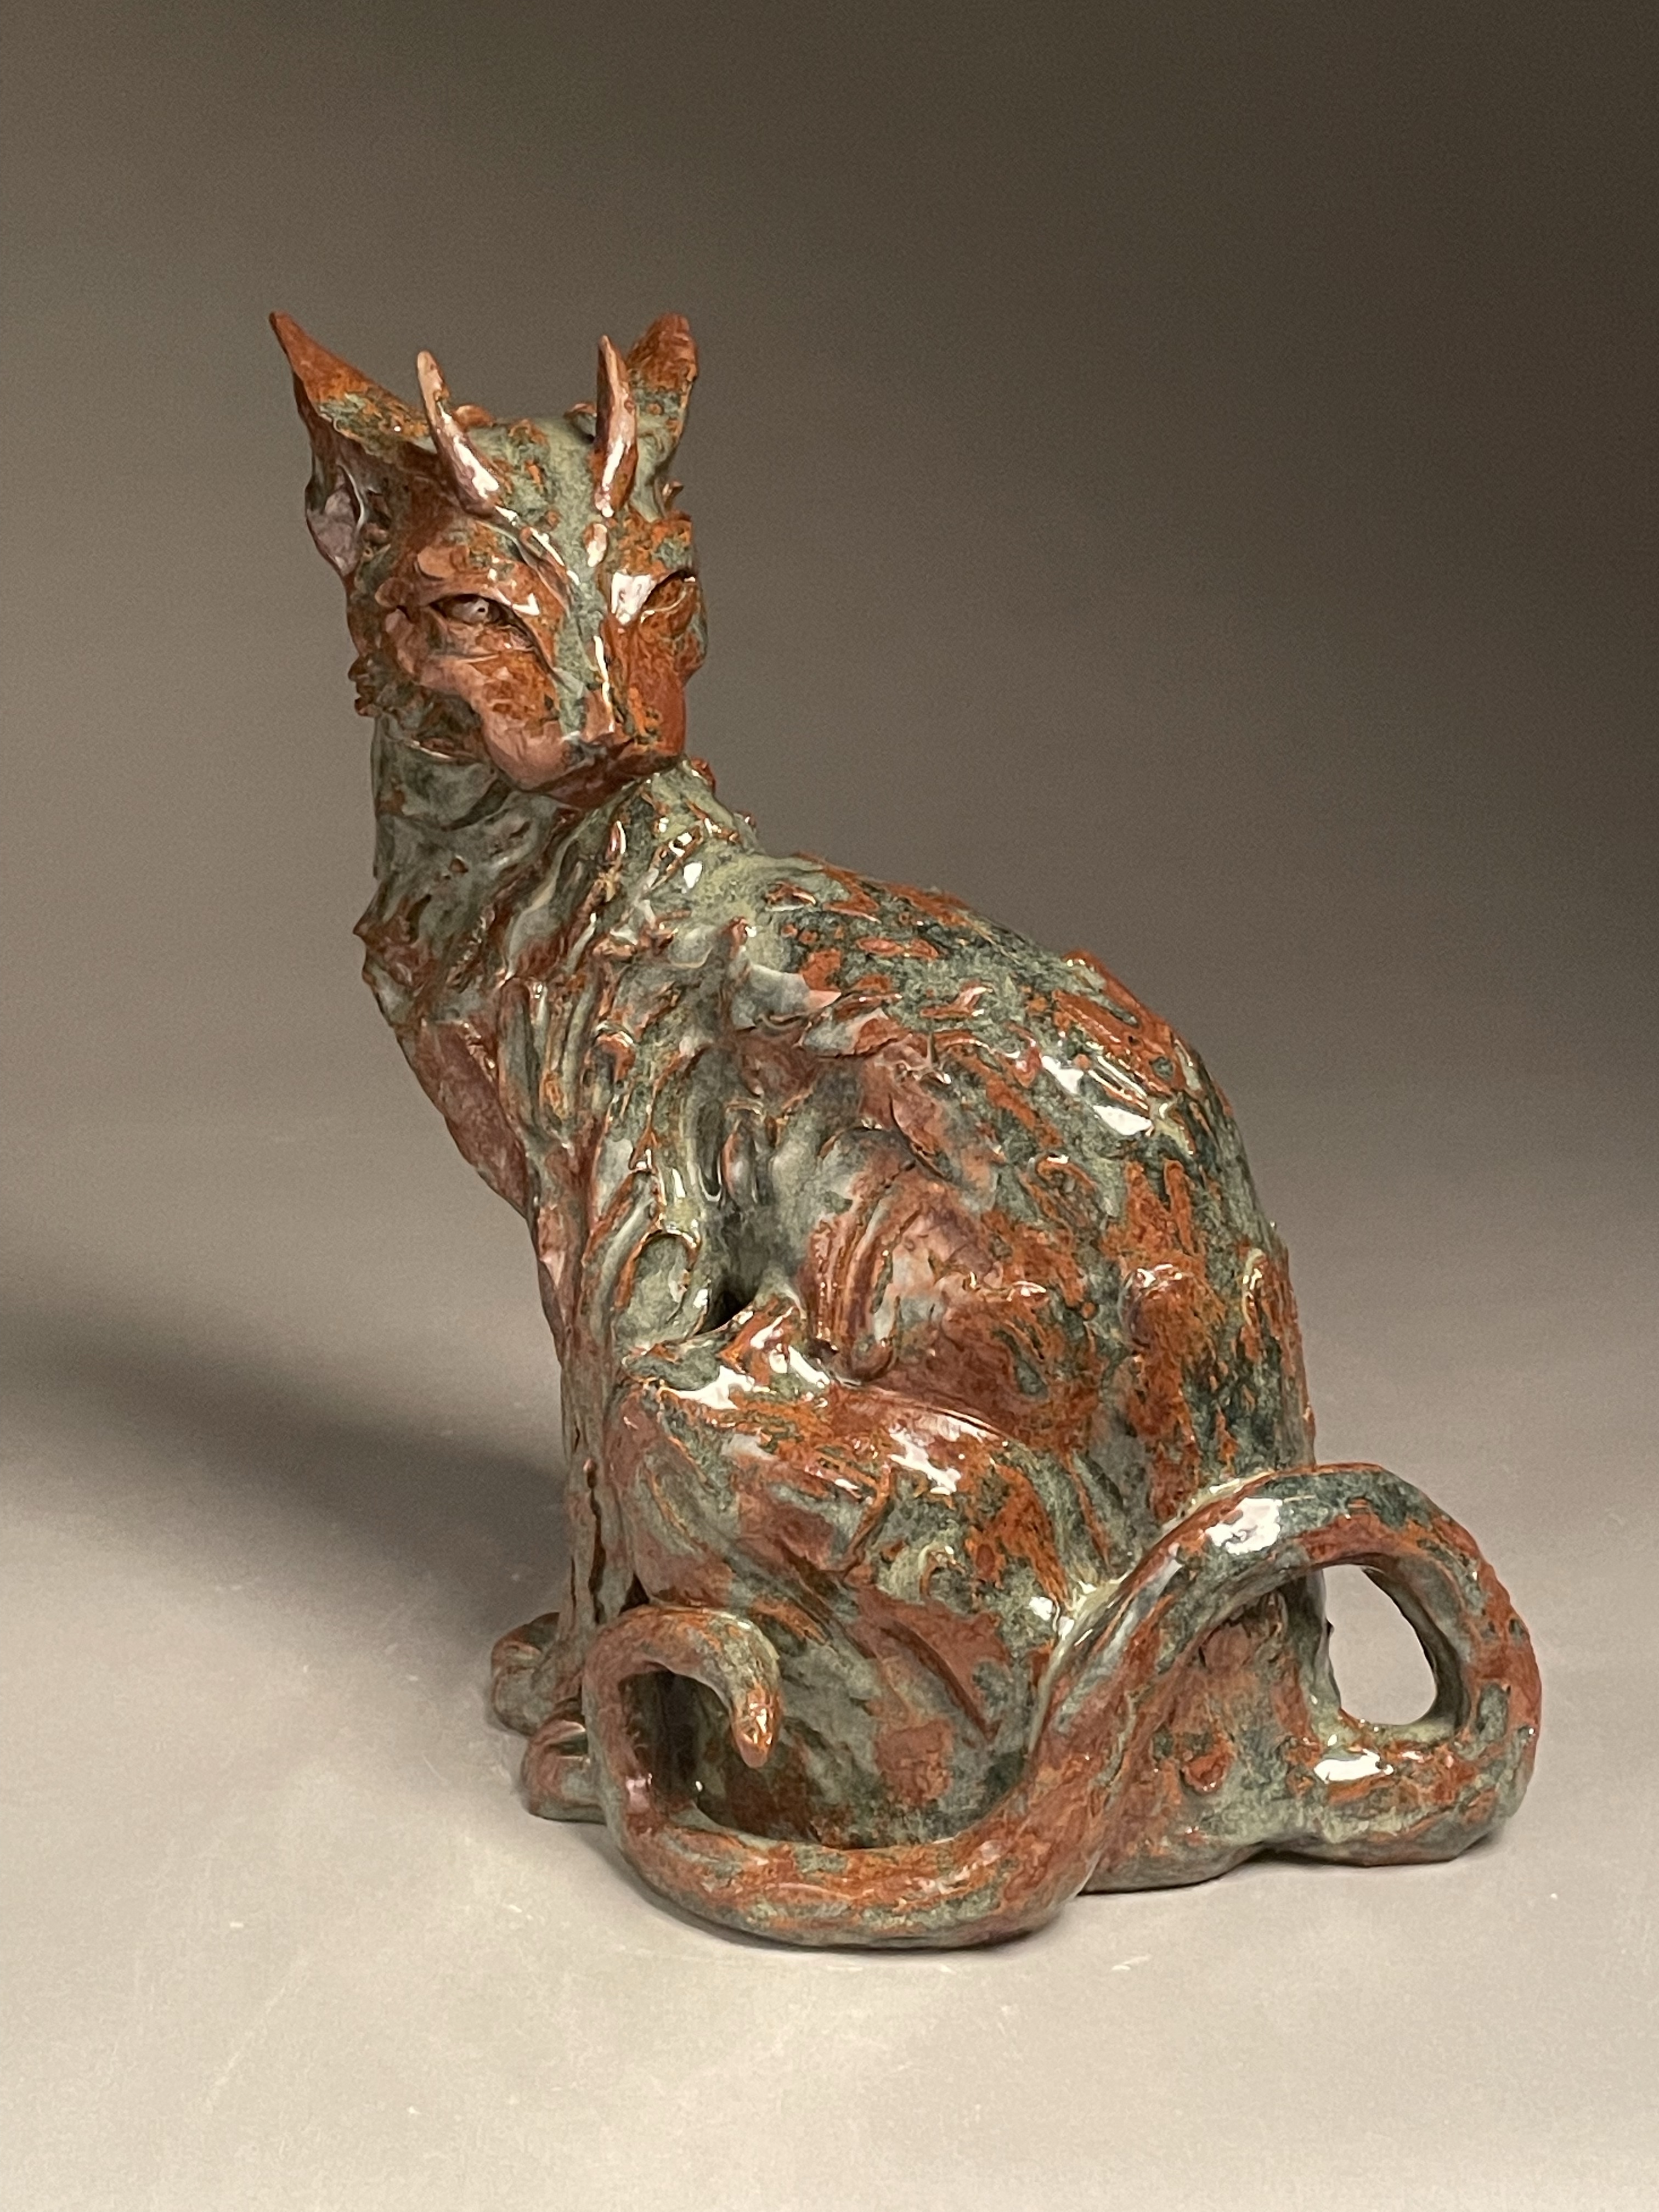 Ceramic cat sculpture with horns sitting and looking behind itself with a blue green glaze